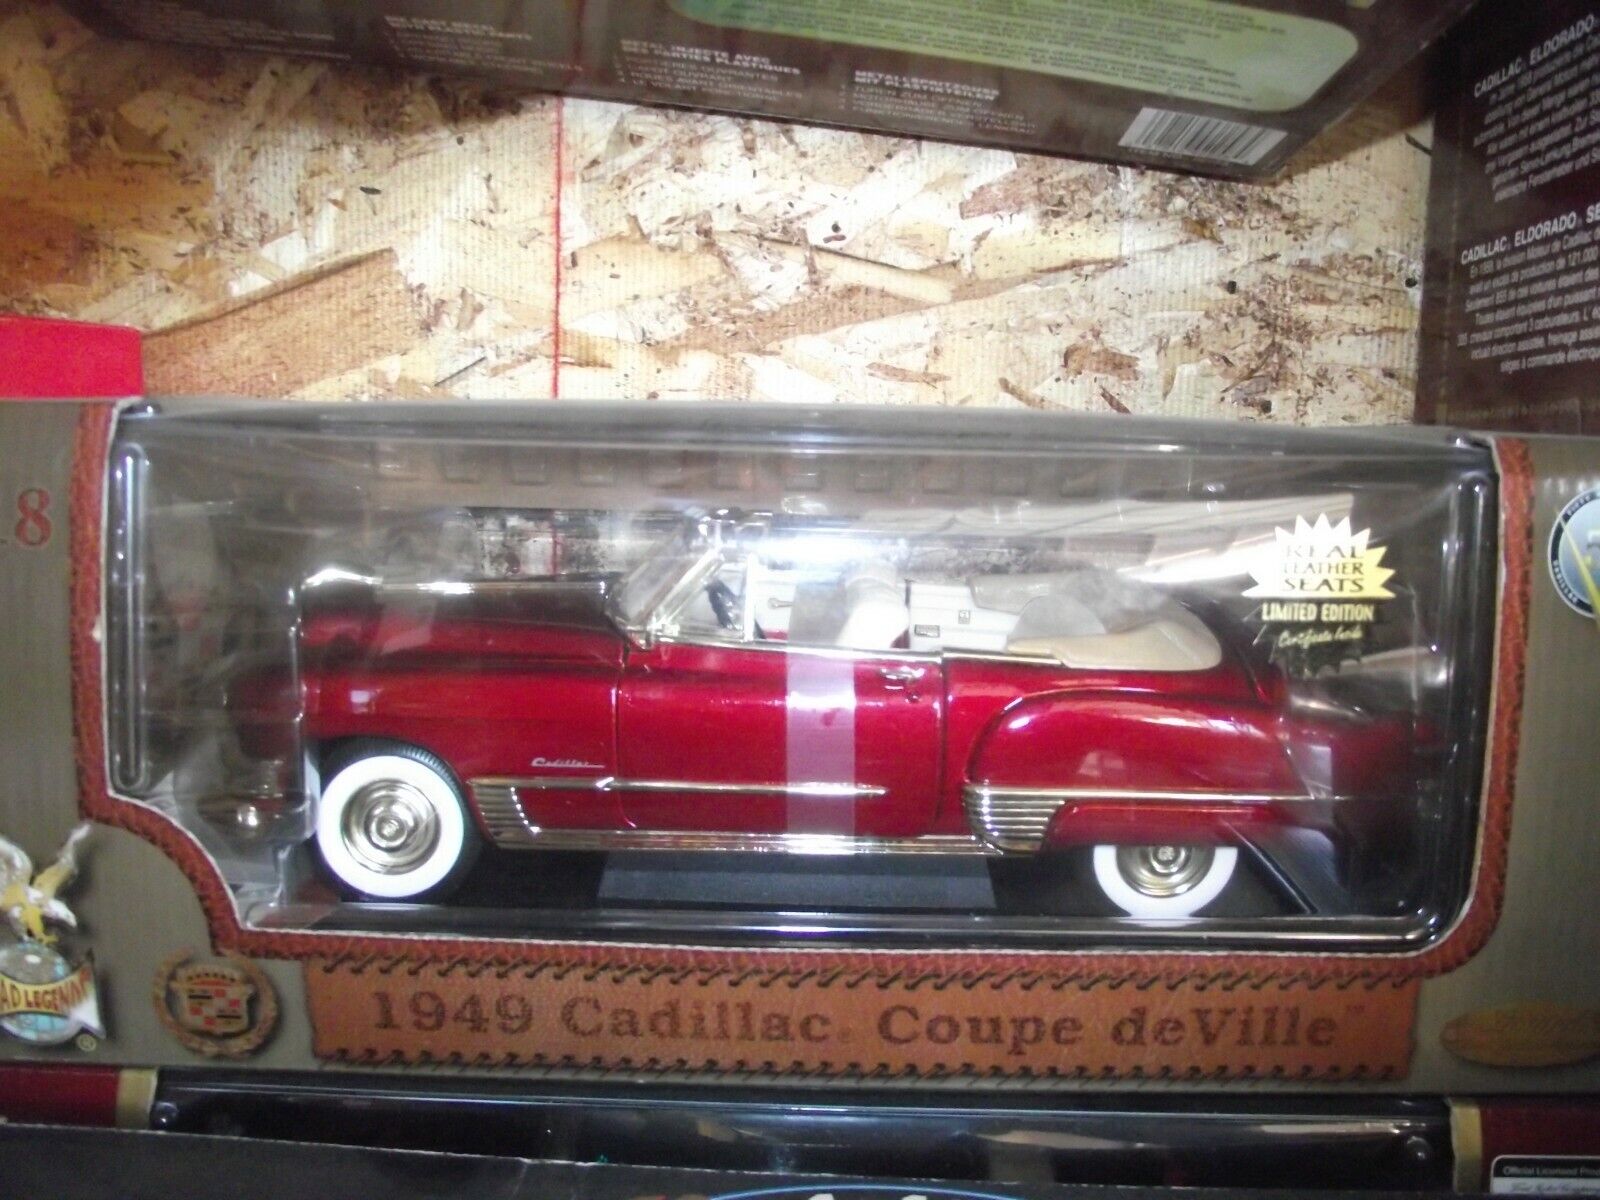 Road Legends 1949 Cadillac Coupe deville red NIB